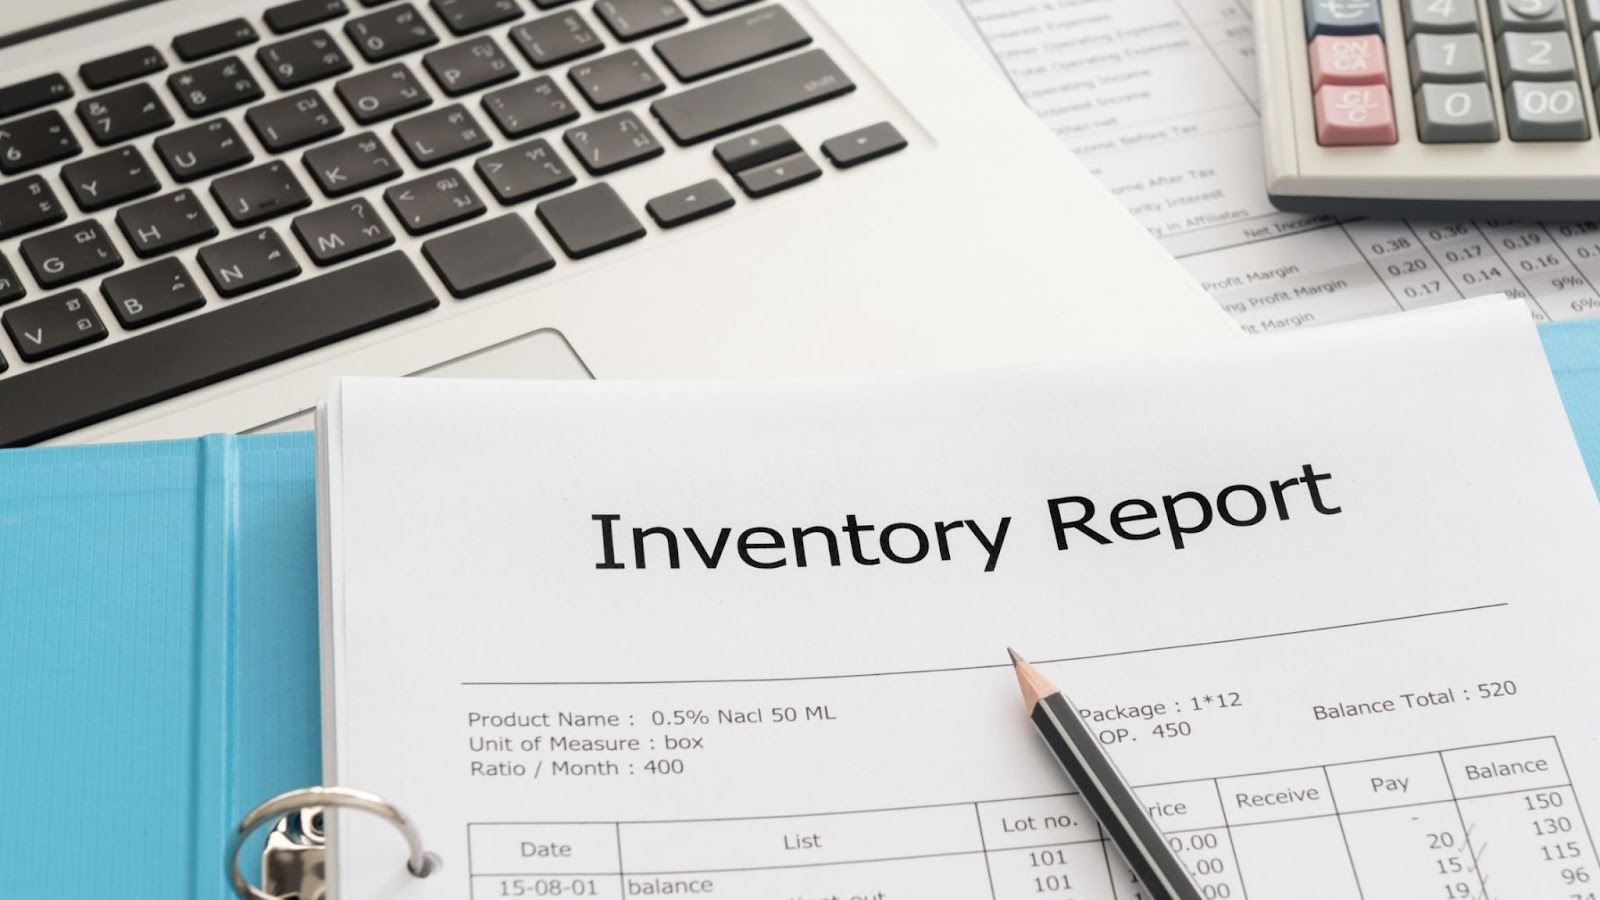 An inventory report